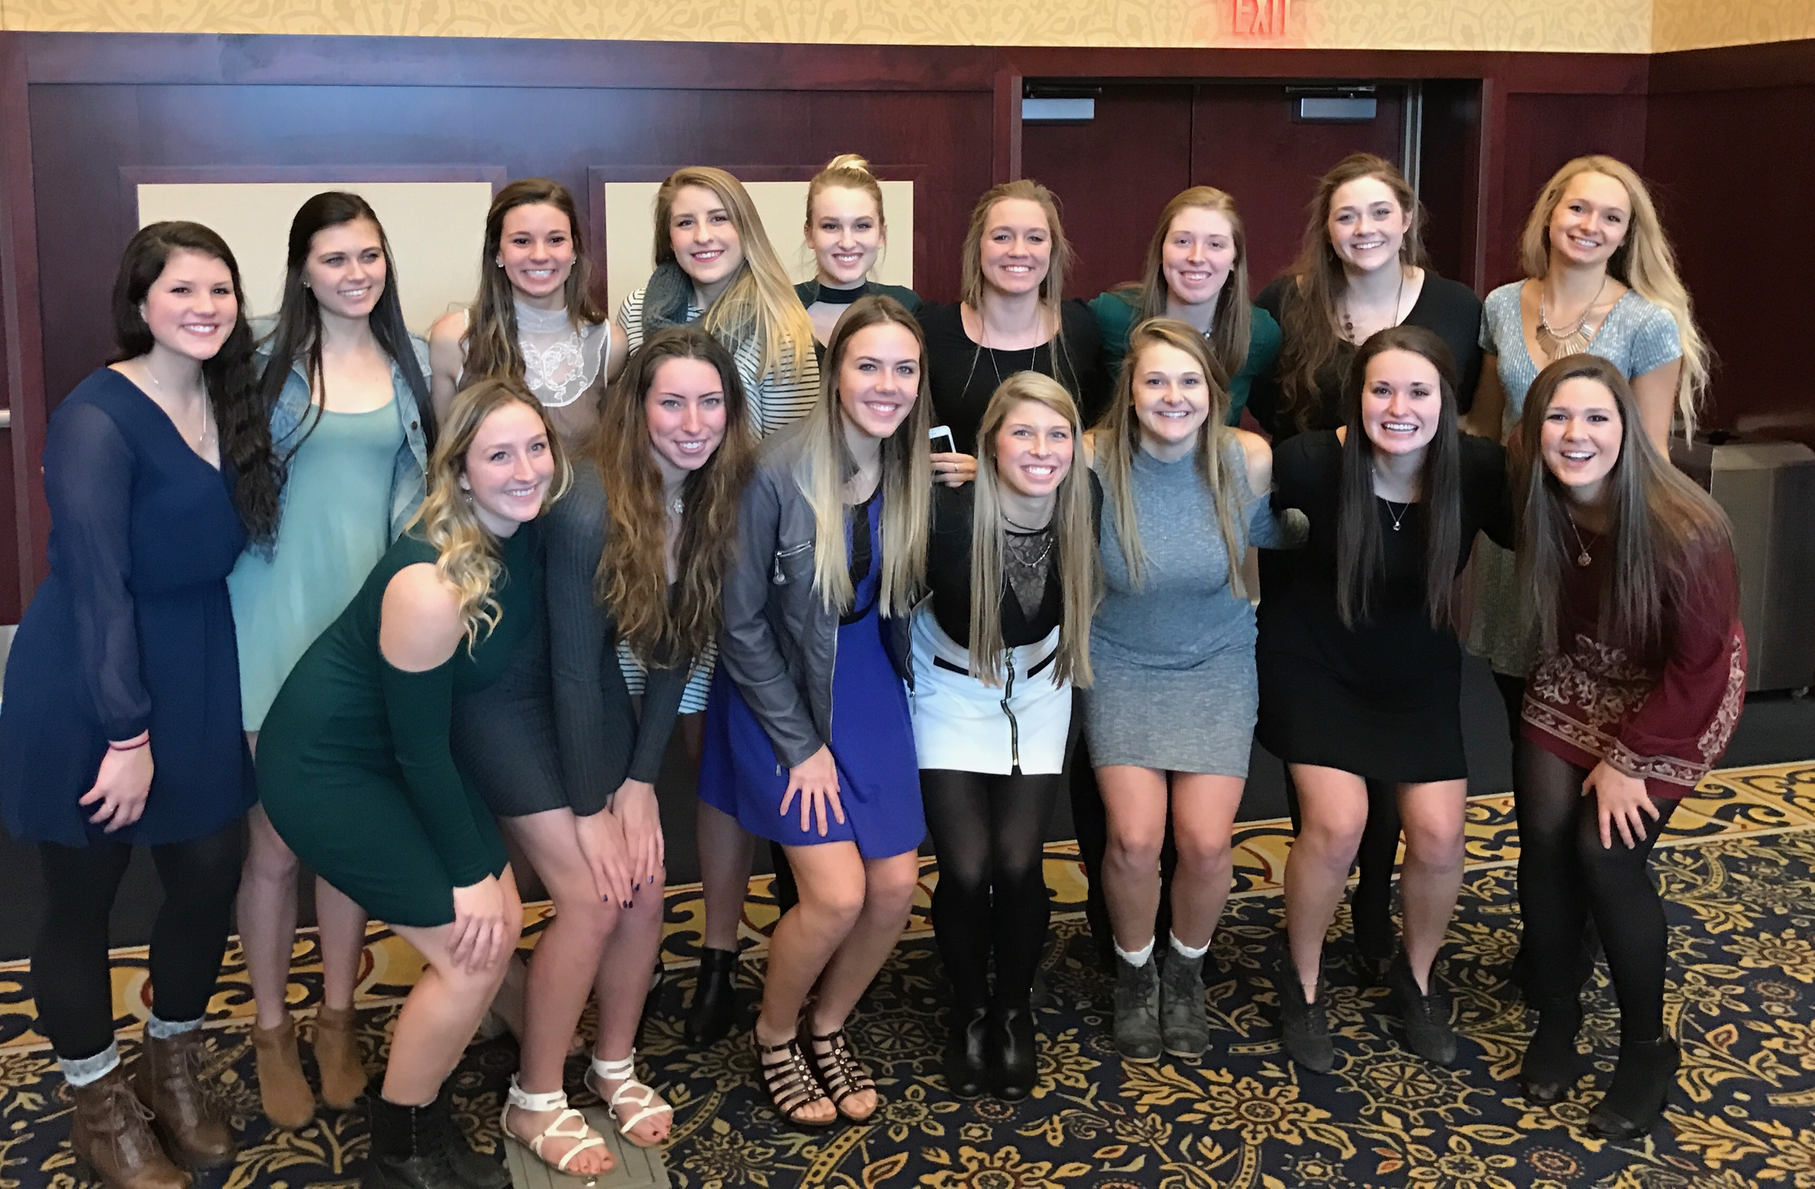 Team Award Winners Announced for Volleyball